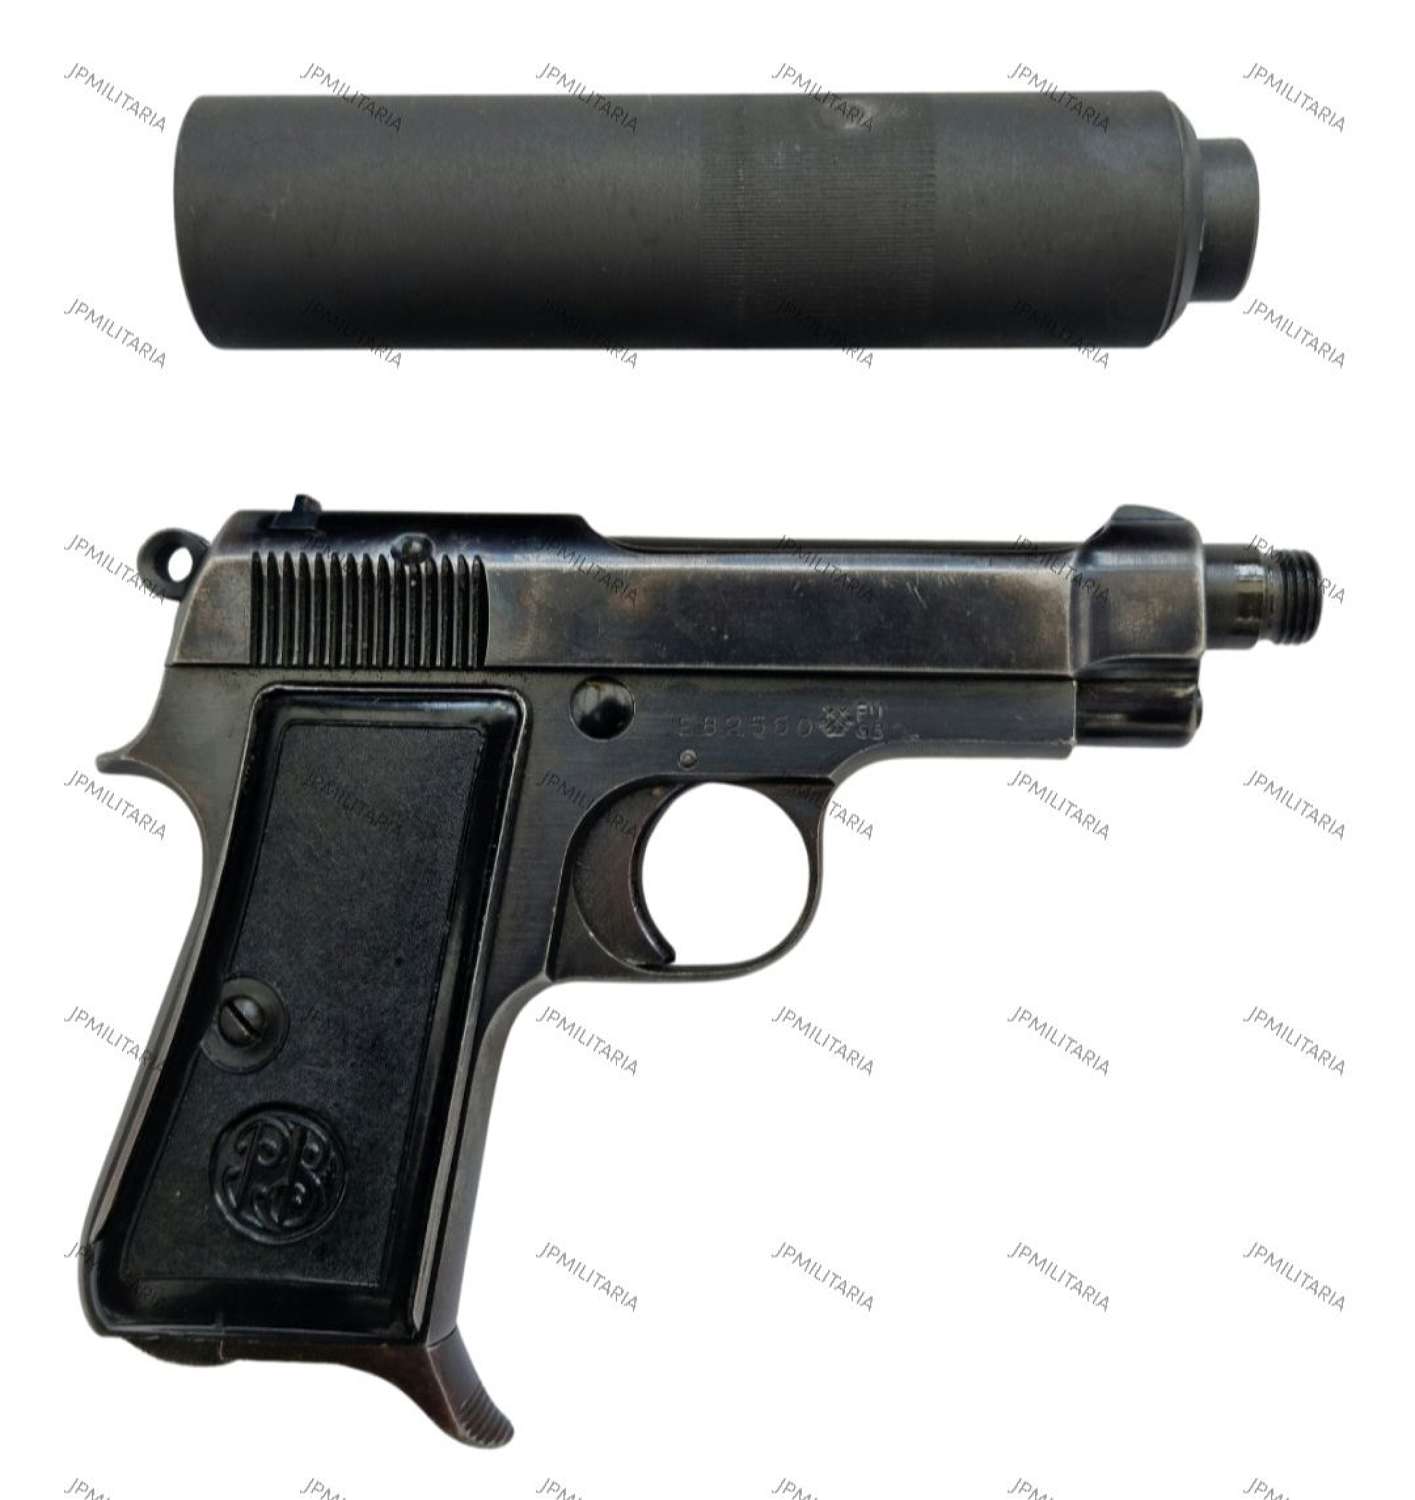 Deactivated Beretta 34 and silencer